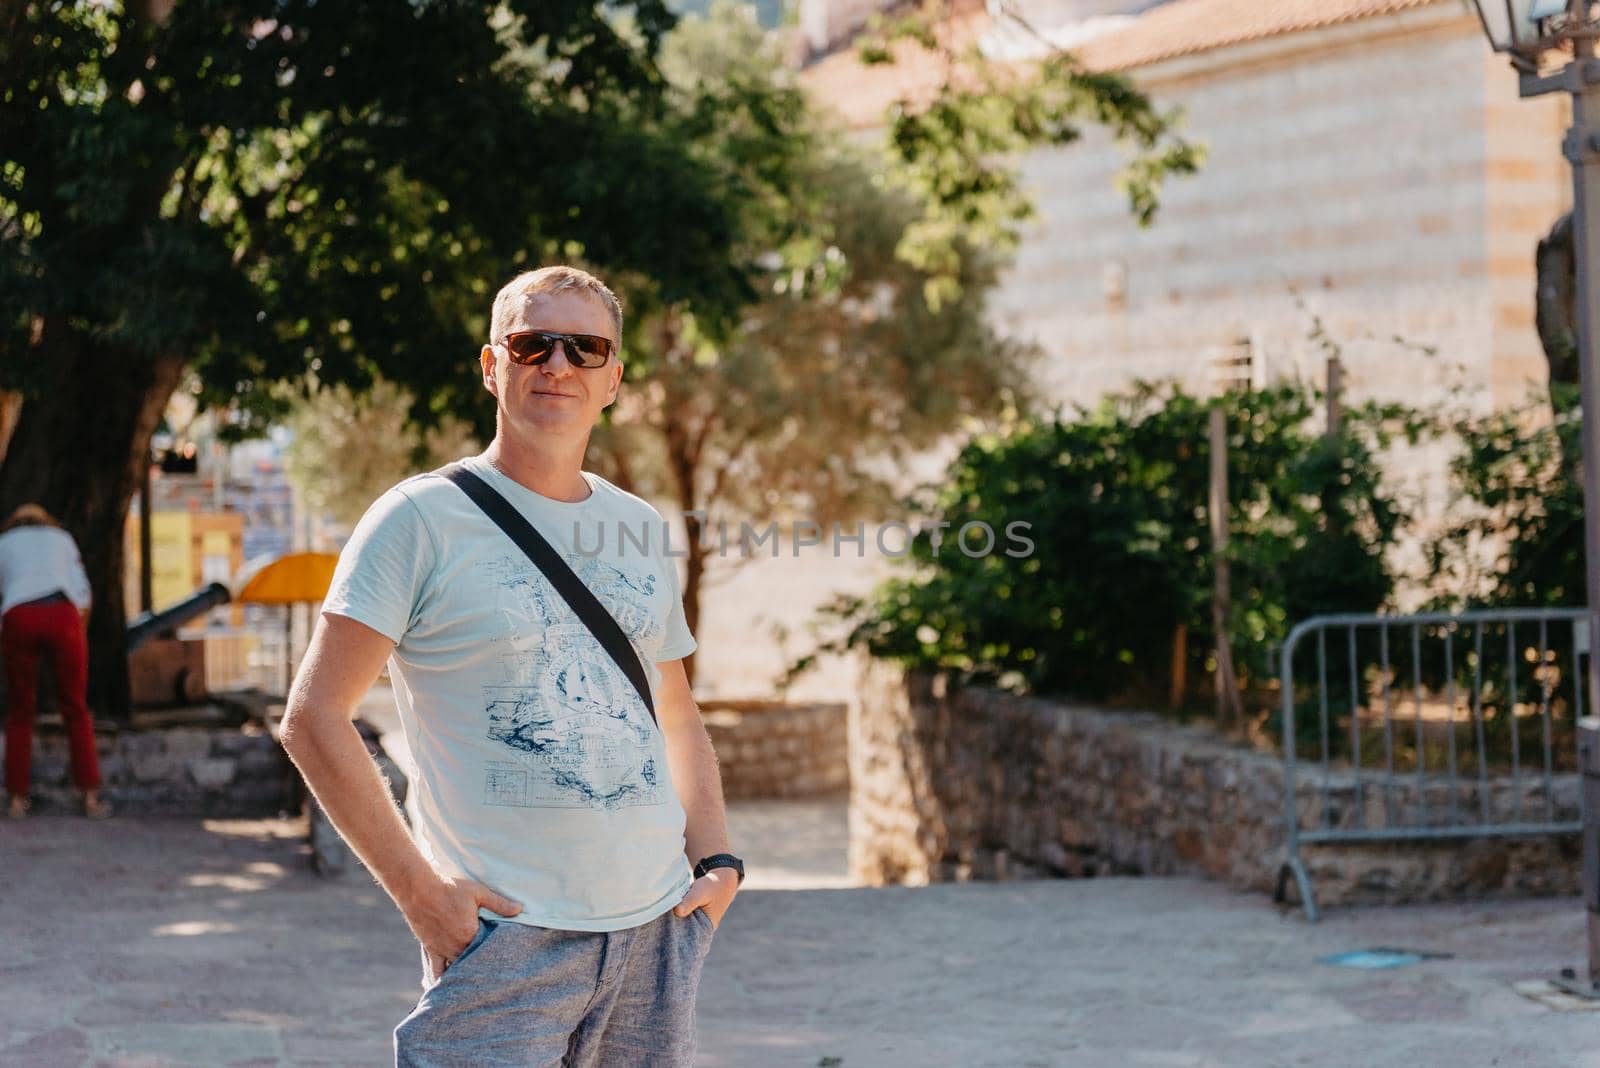 A handsome young man standing and smiling happily in the background of urban buildings. Forty years old caucasian tourist man outdoor near old city buildings - summer holiday.